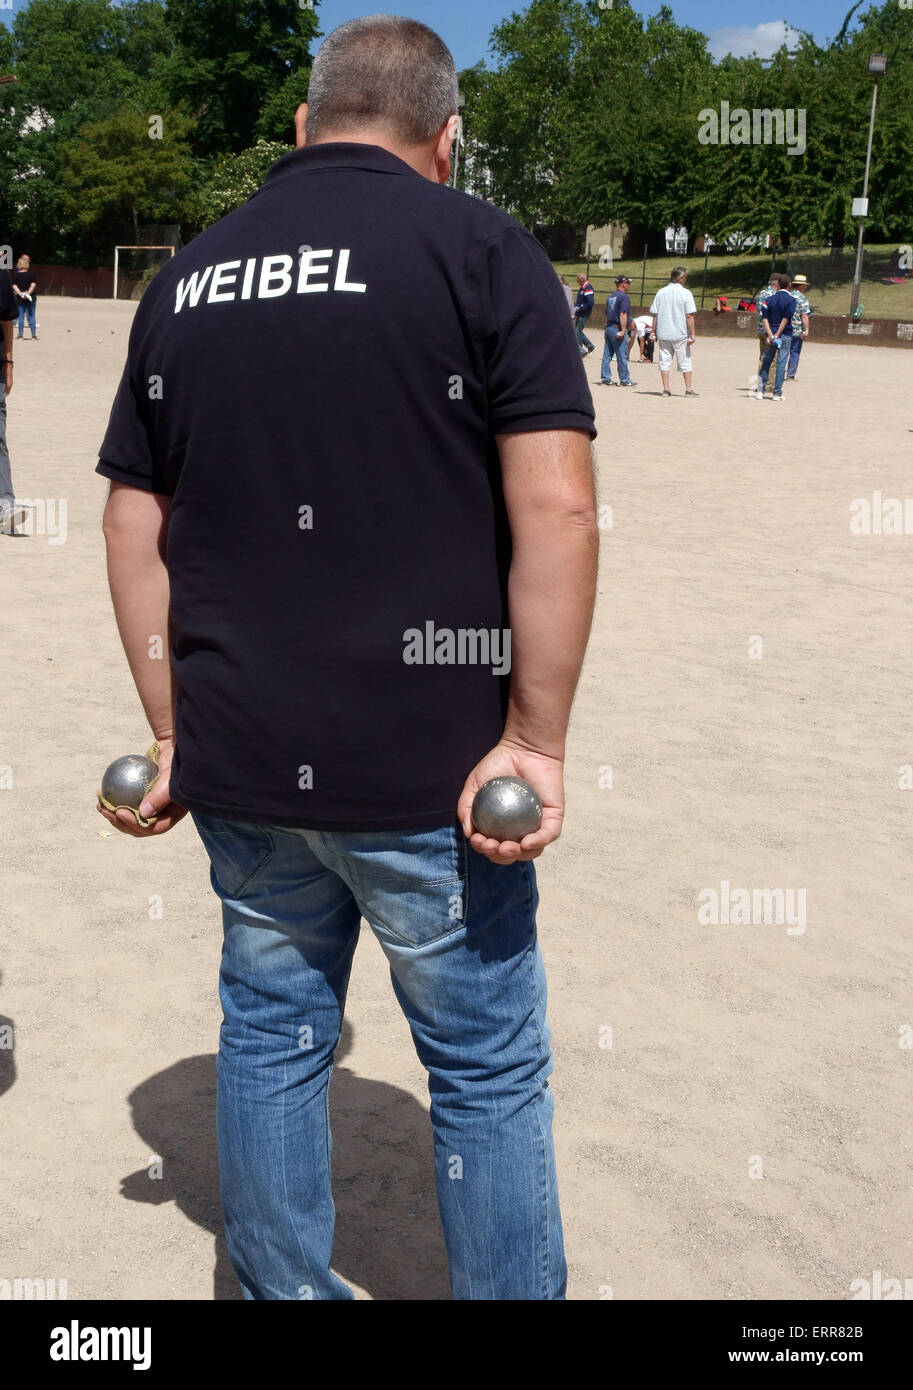 London, UK. 7th June, 2015. The Londonaise 2015 Petanque Tournament reached its final stage in Islington, London today. Teams from far and wide gathered in Barnard Park to compete for the 2,500 Euros prize. Among the players was Charles 'Claudy' Weibel from Belgium who has been World Champion in boules. Credit:  Jeffrey Blackler/Alamy Live News Stock Photo